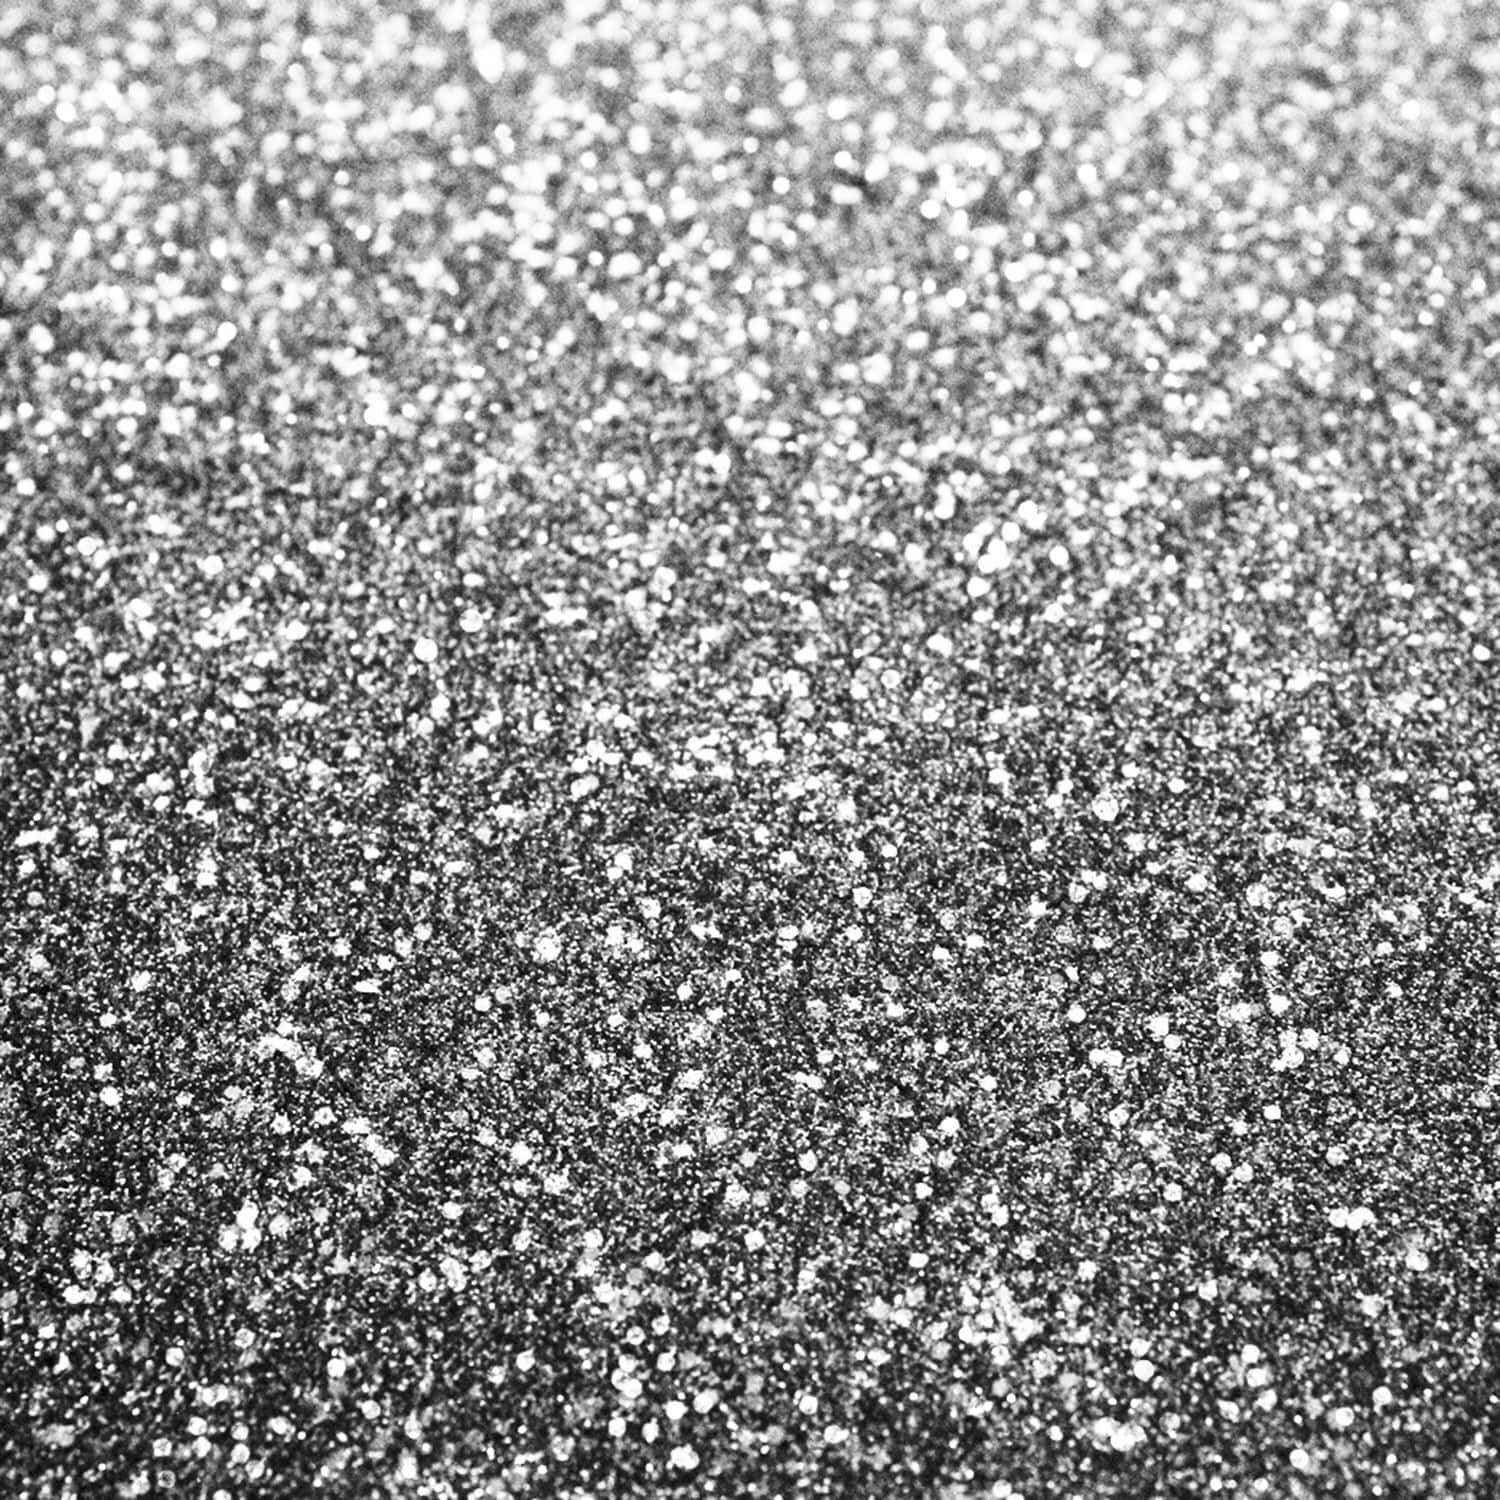 A Black And White Photo Of A Glittery Surface